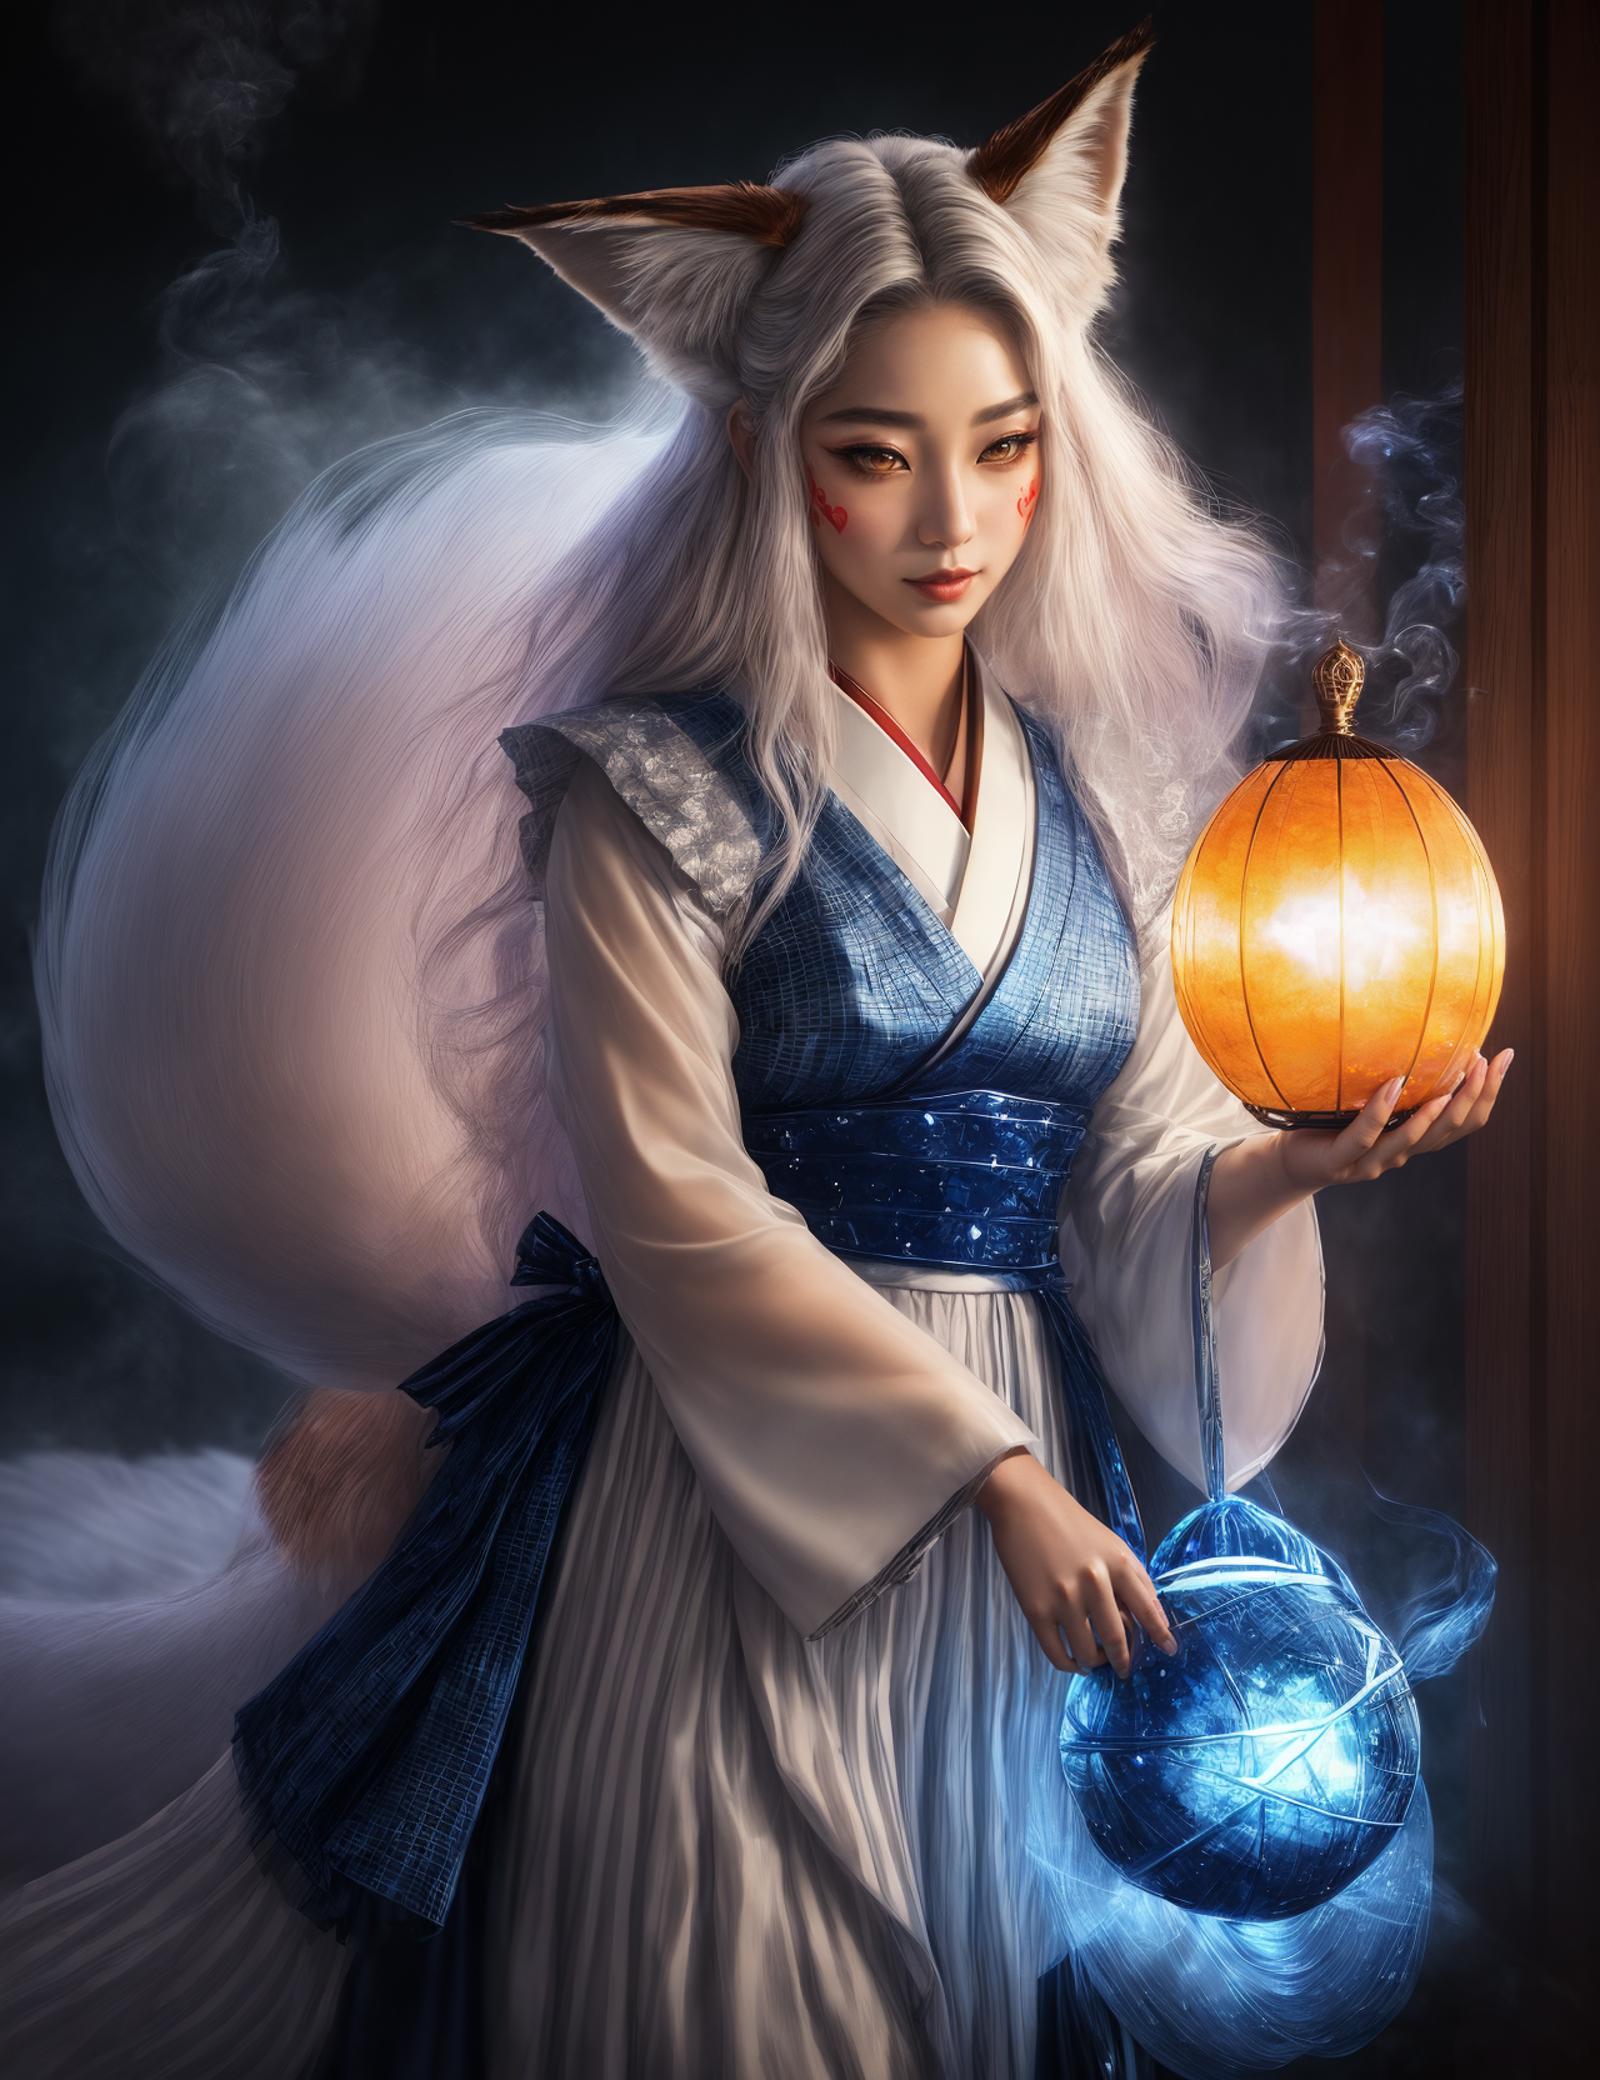 Billions of Charaters Extension - magical characters, magical attires, professions, magic types, beings image by DonMischo